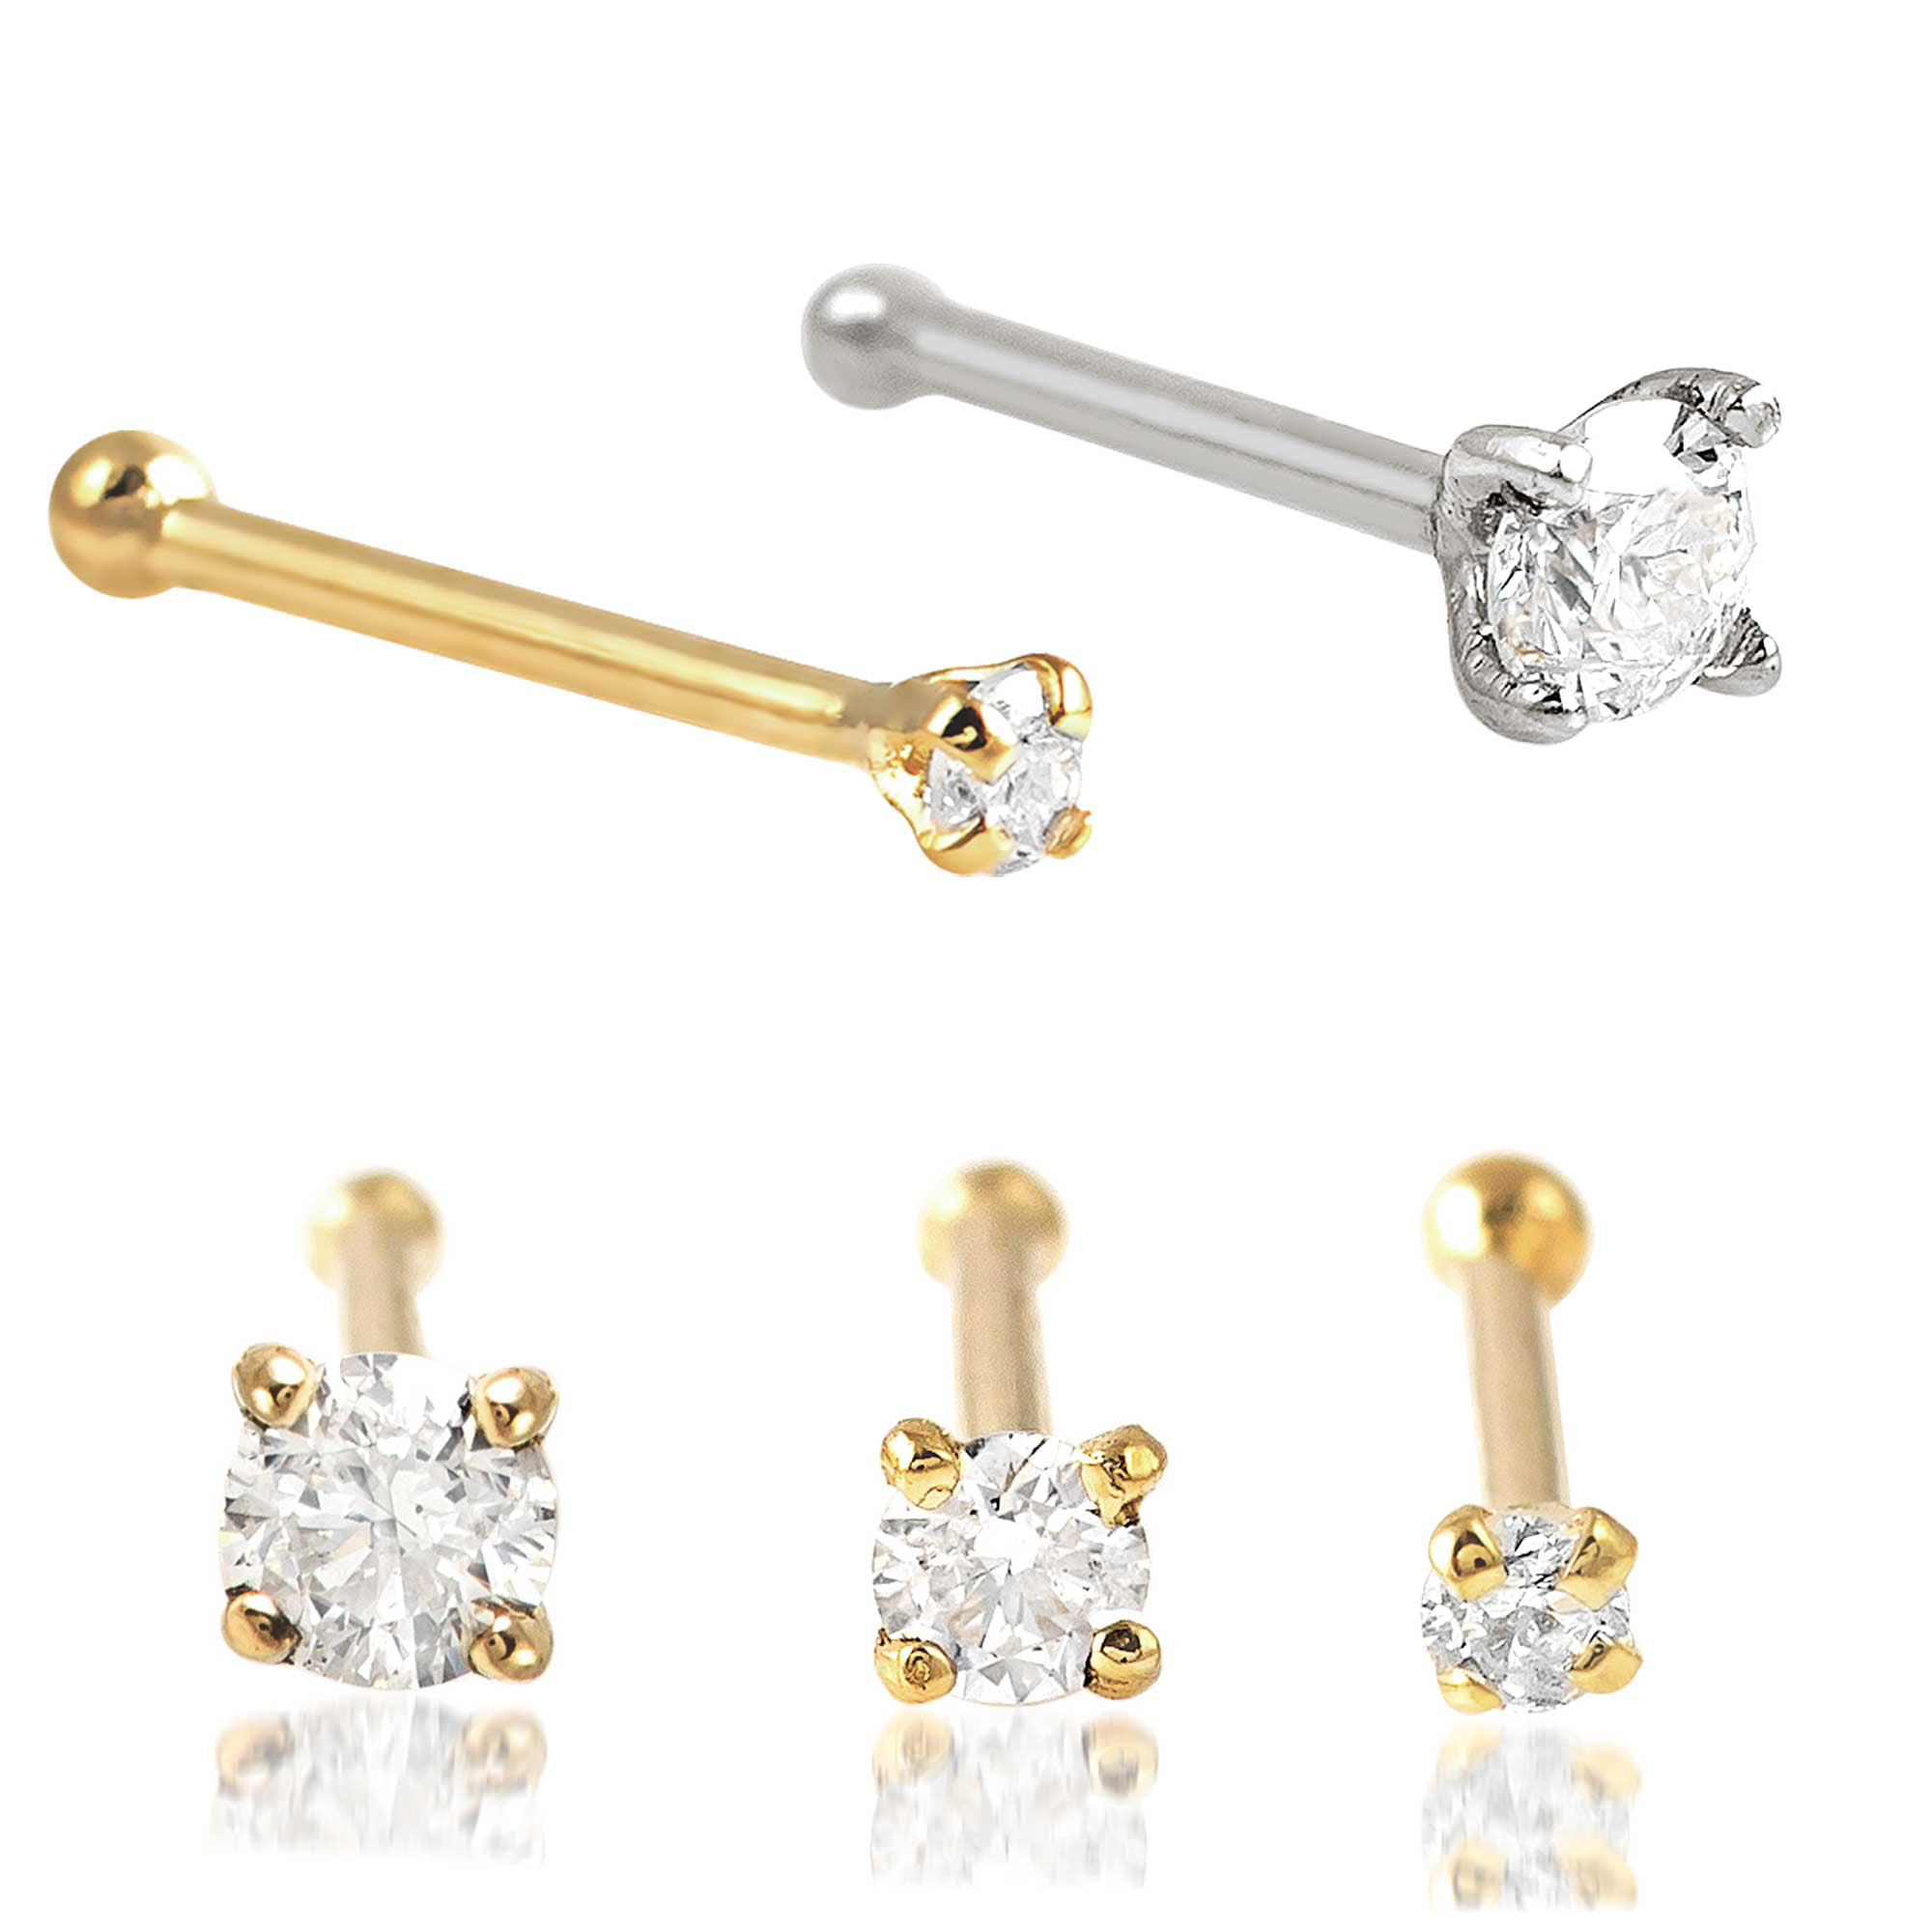 22G-6 mm 14K Solid Yellow Gold  Jeweled Crystal Prong-Set Ball End Nose Stud 